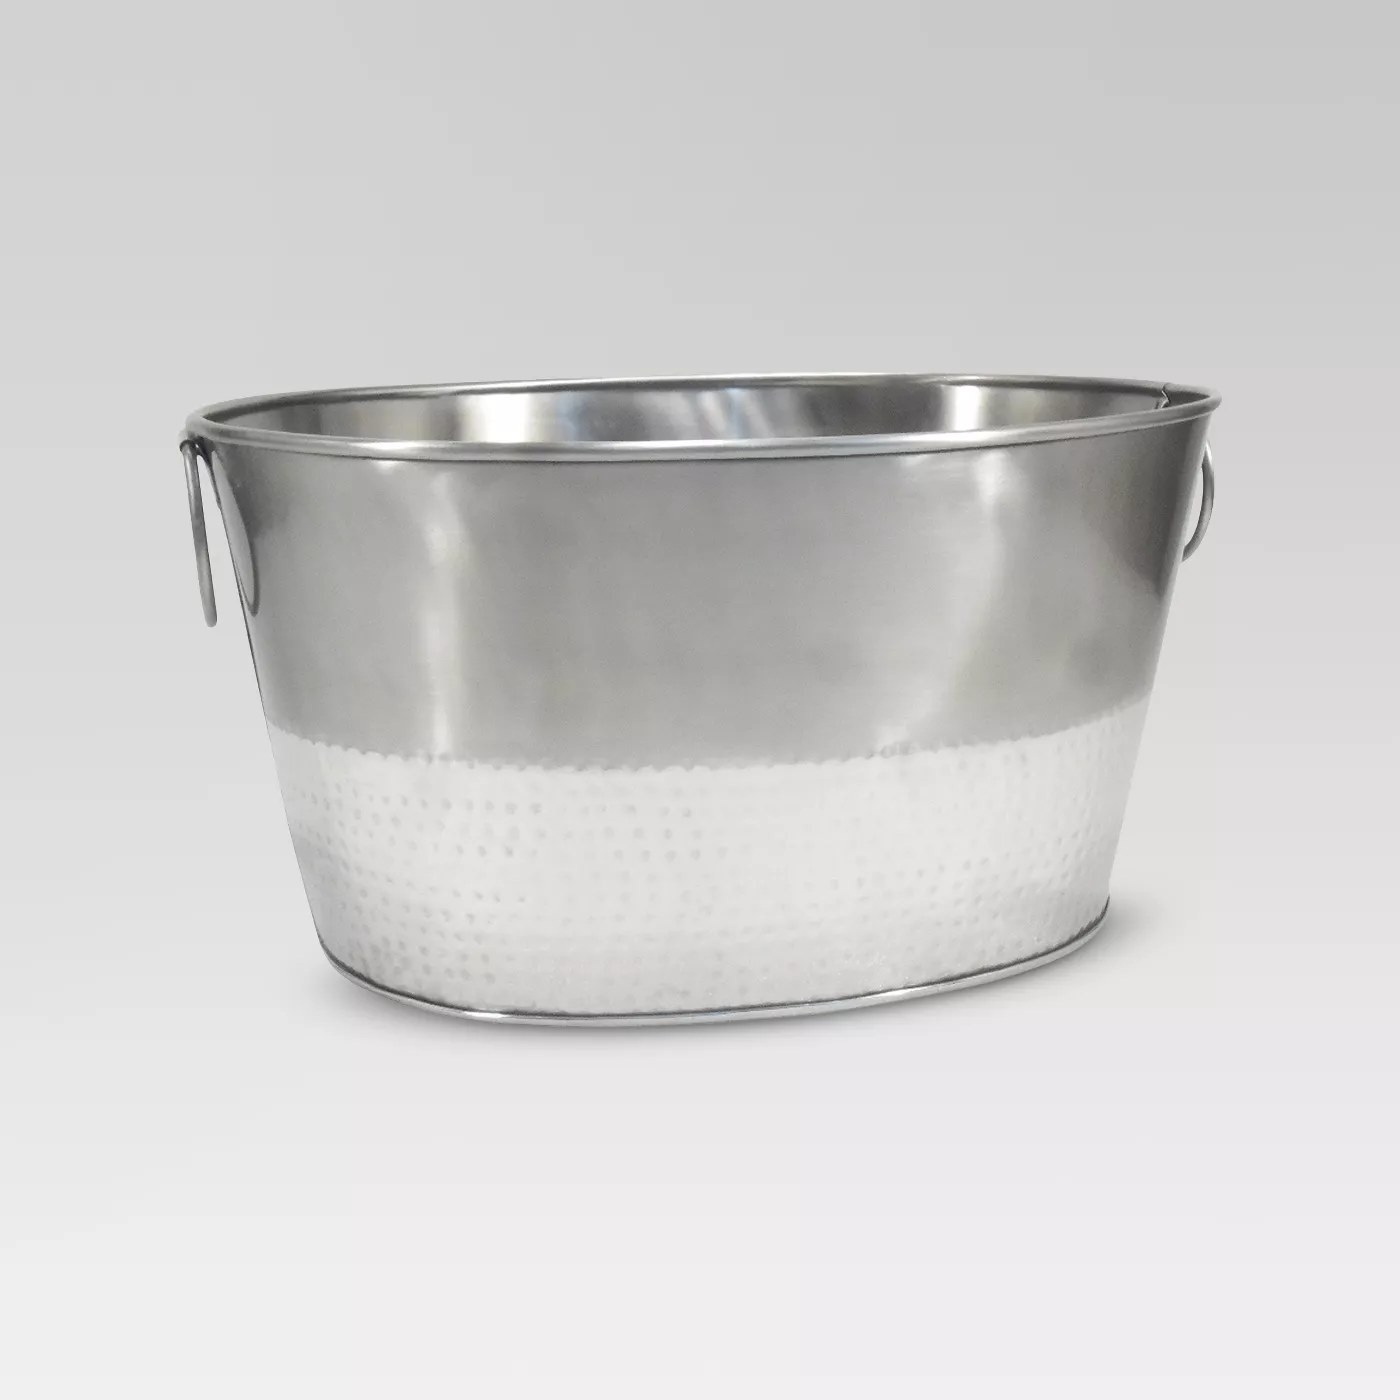 The stainless steel beverage tub with a hammered bottom